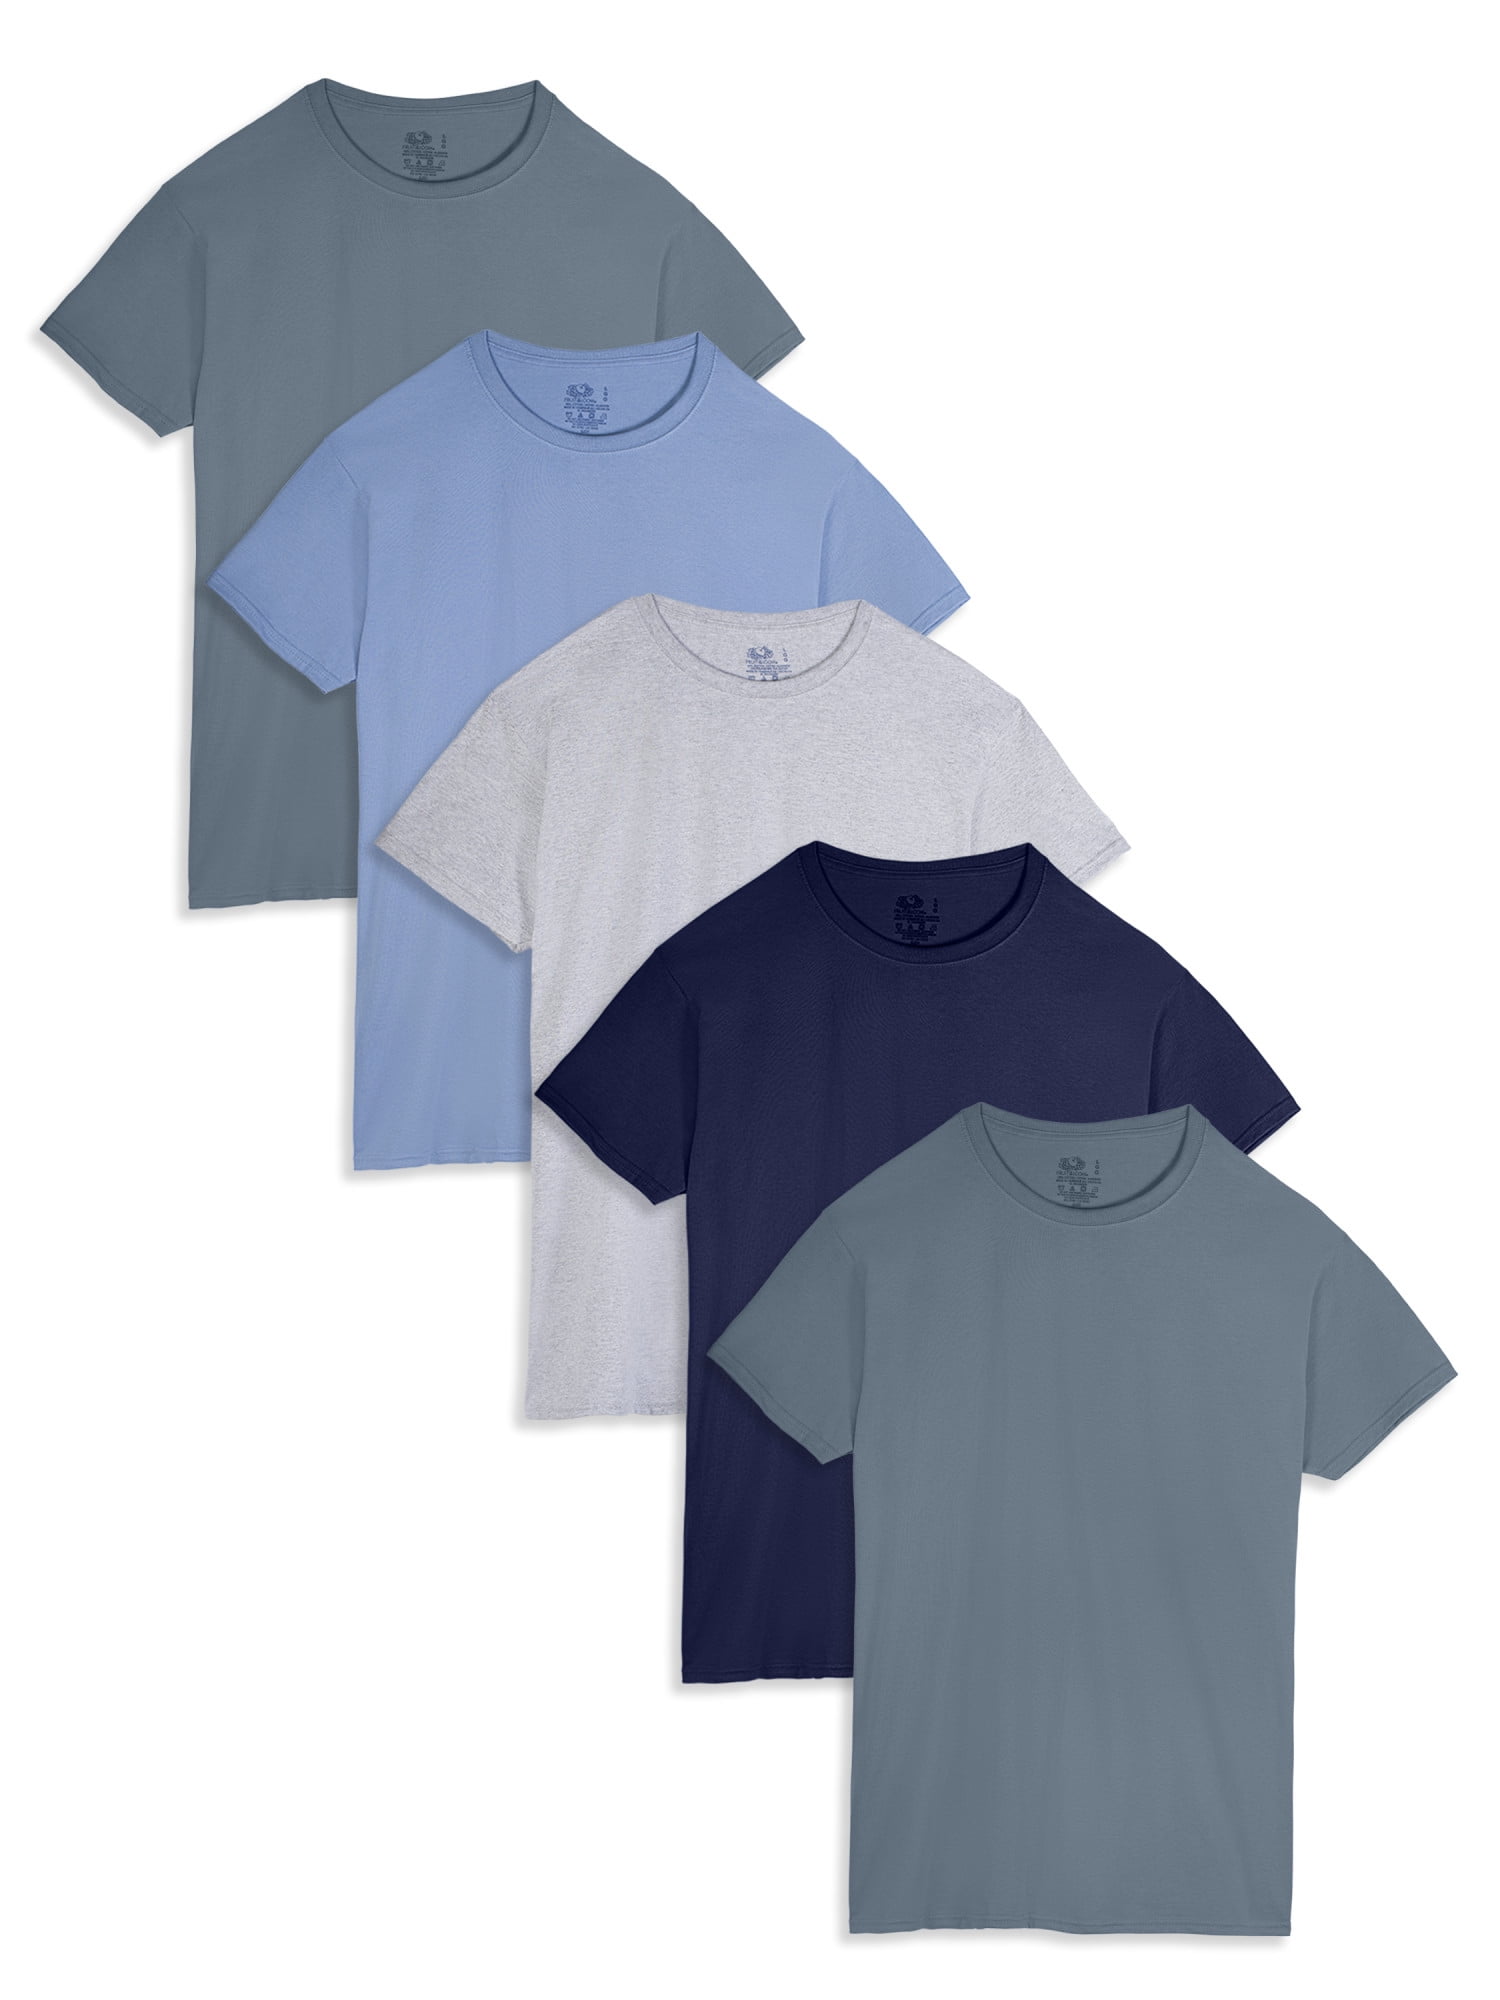 Assorted, Fruit of the Loom Mens 5-Pack Pocket T-Shirt